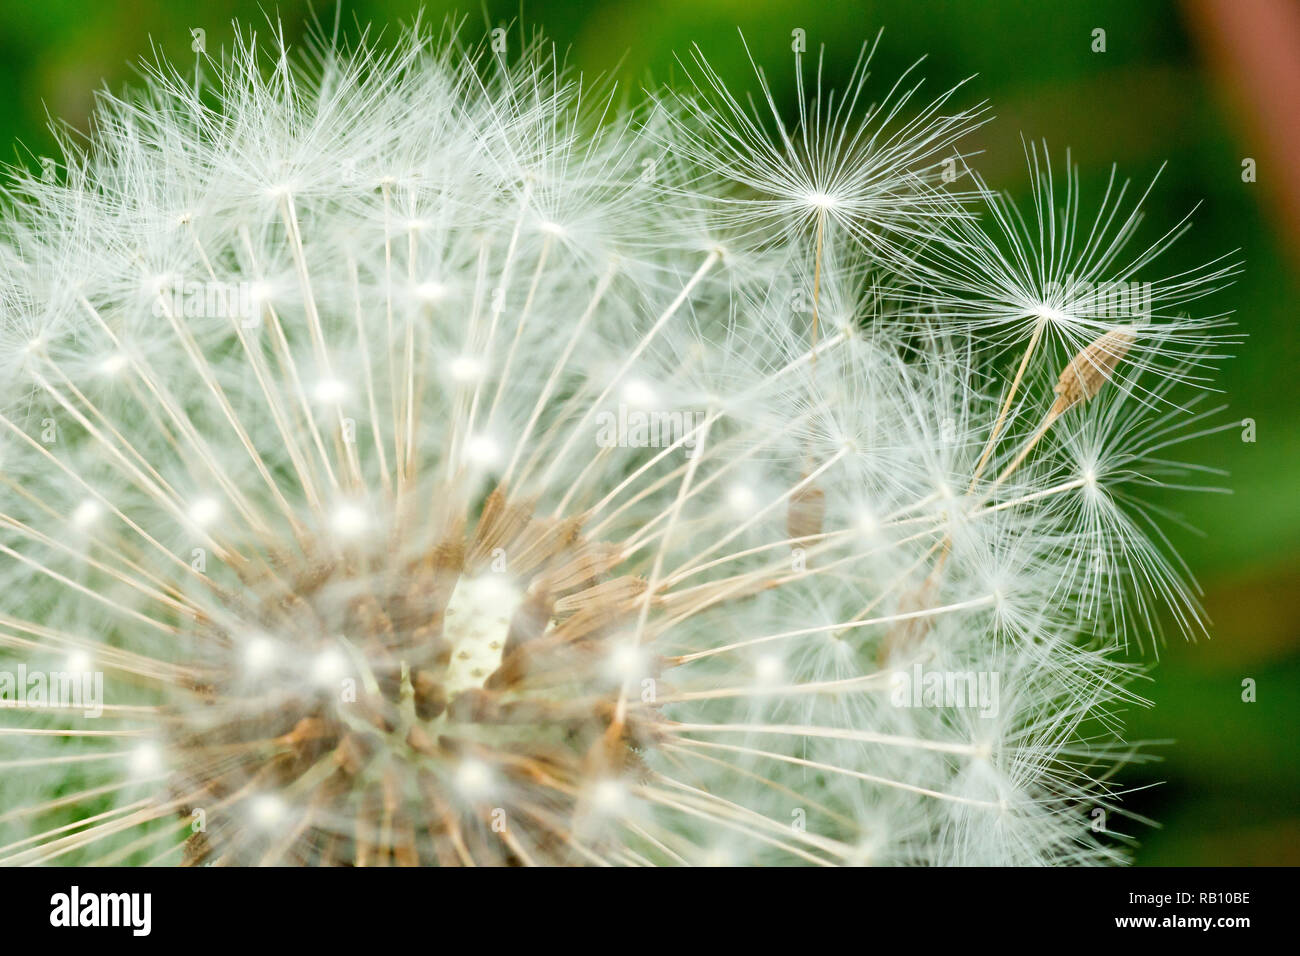 Dandelion seedhead (taraxacum officinale), close up of the outer edge showing seeds beginning to break free. Stock Photo